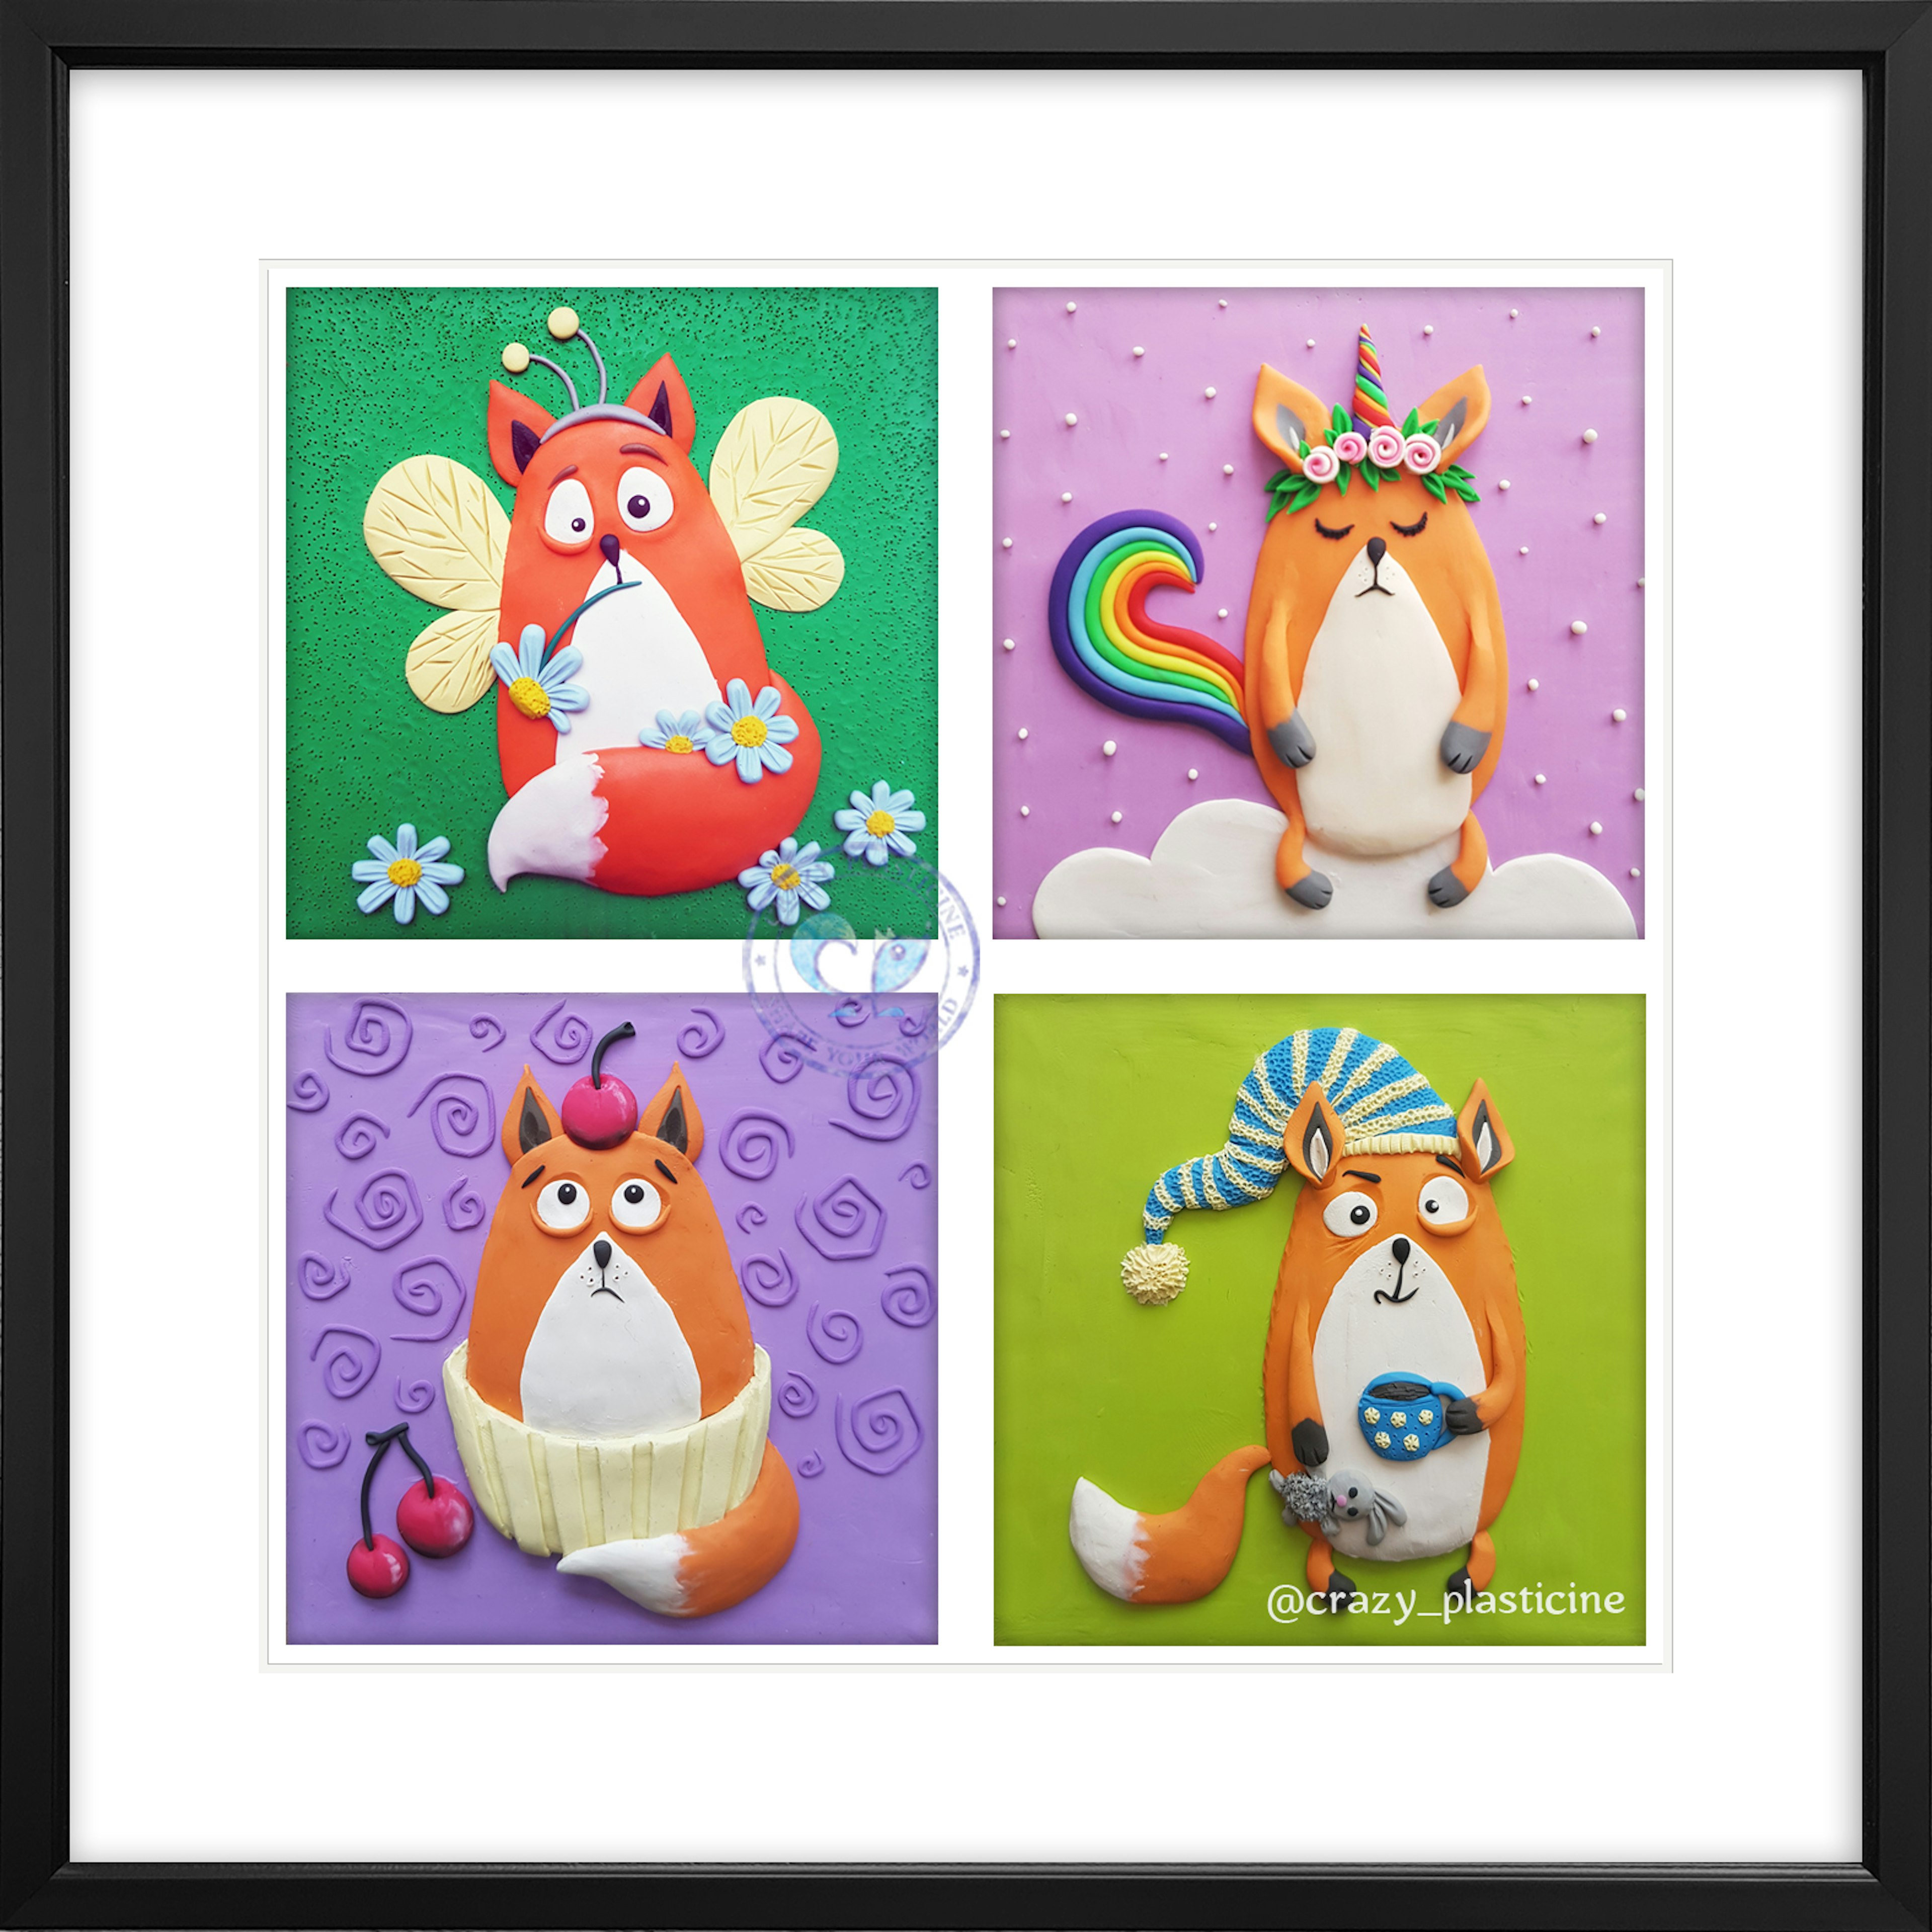 Main image for Quirky Fox Cutsey plasticine painting